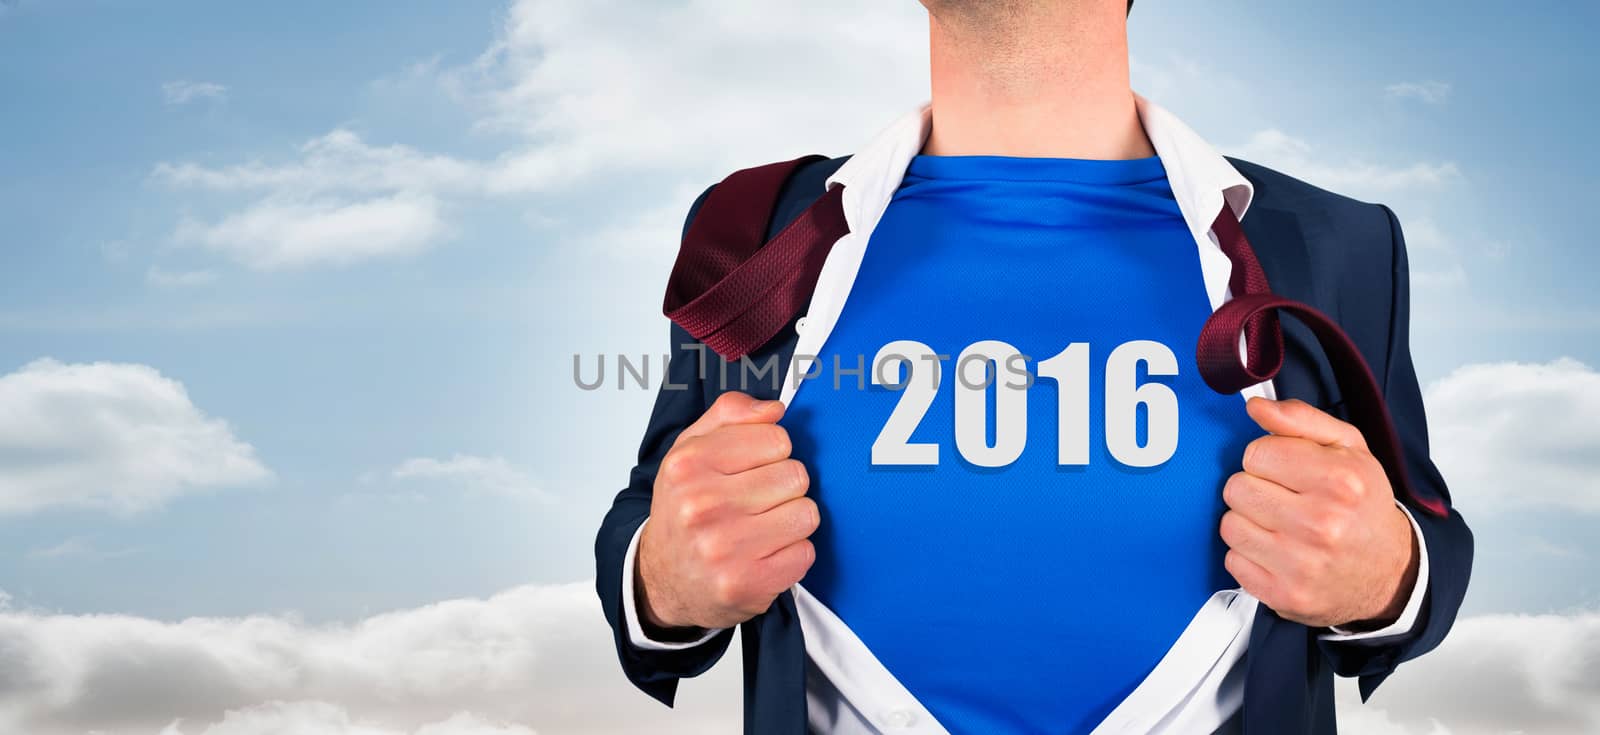 Composite image of businessman opening his shirt superhero style against bright sky